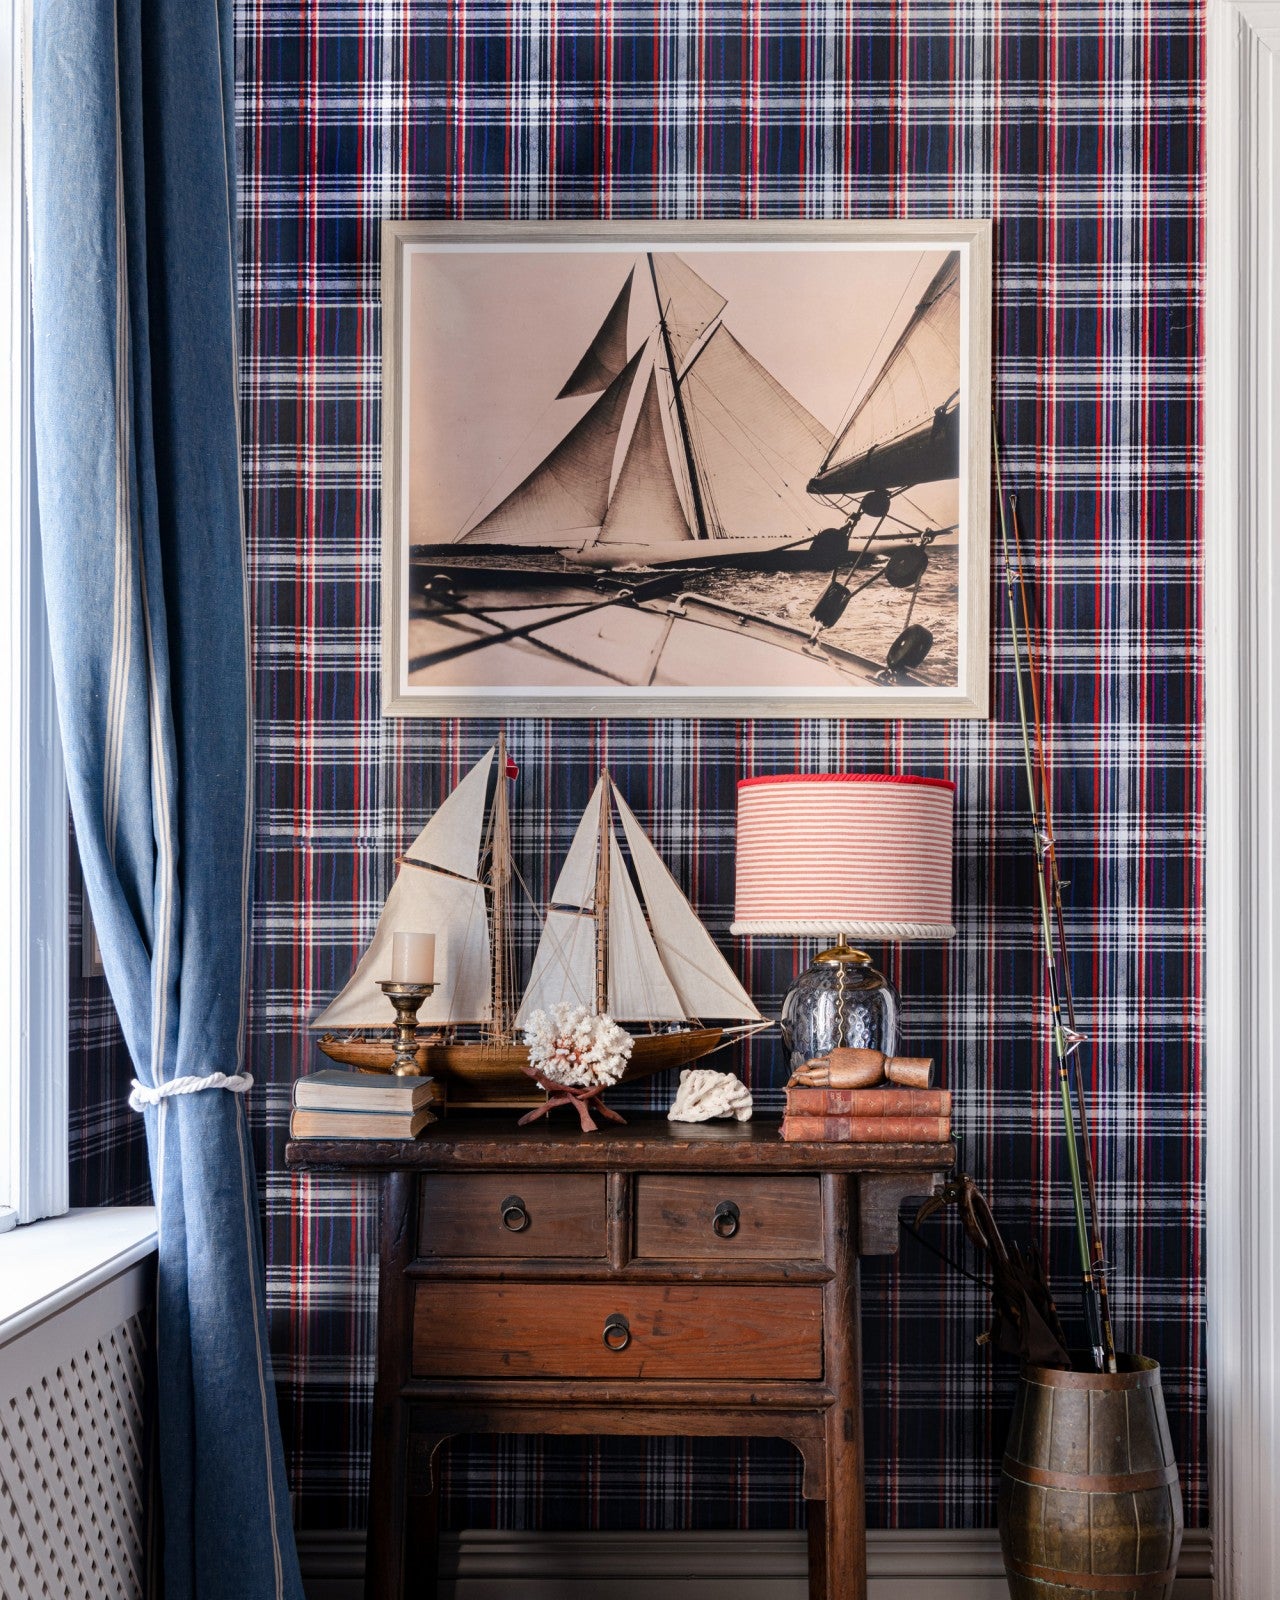 Seaport Plaid Wallpaper in Cream from The Sundance Villa Collection by Mind The Gap